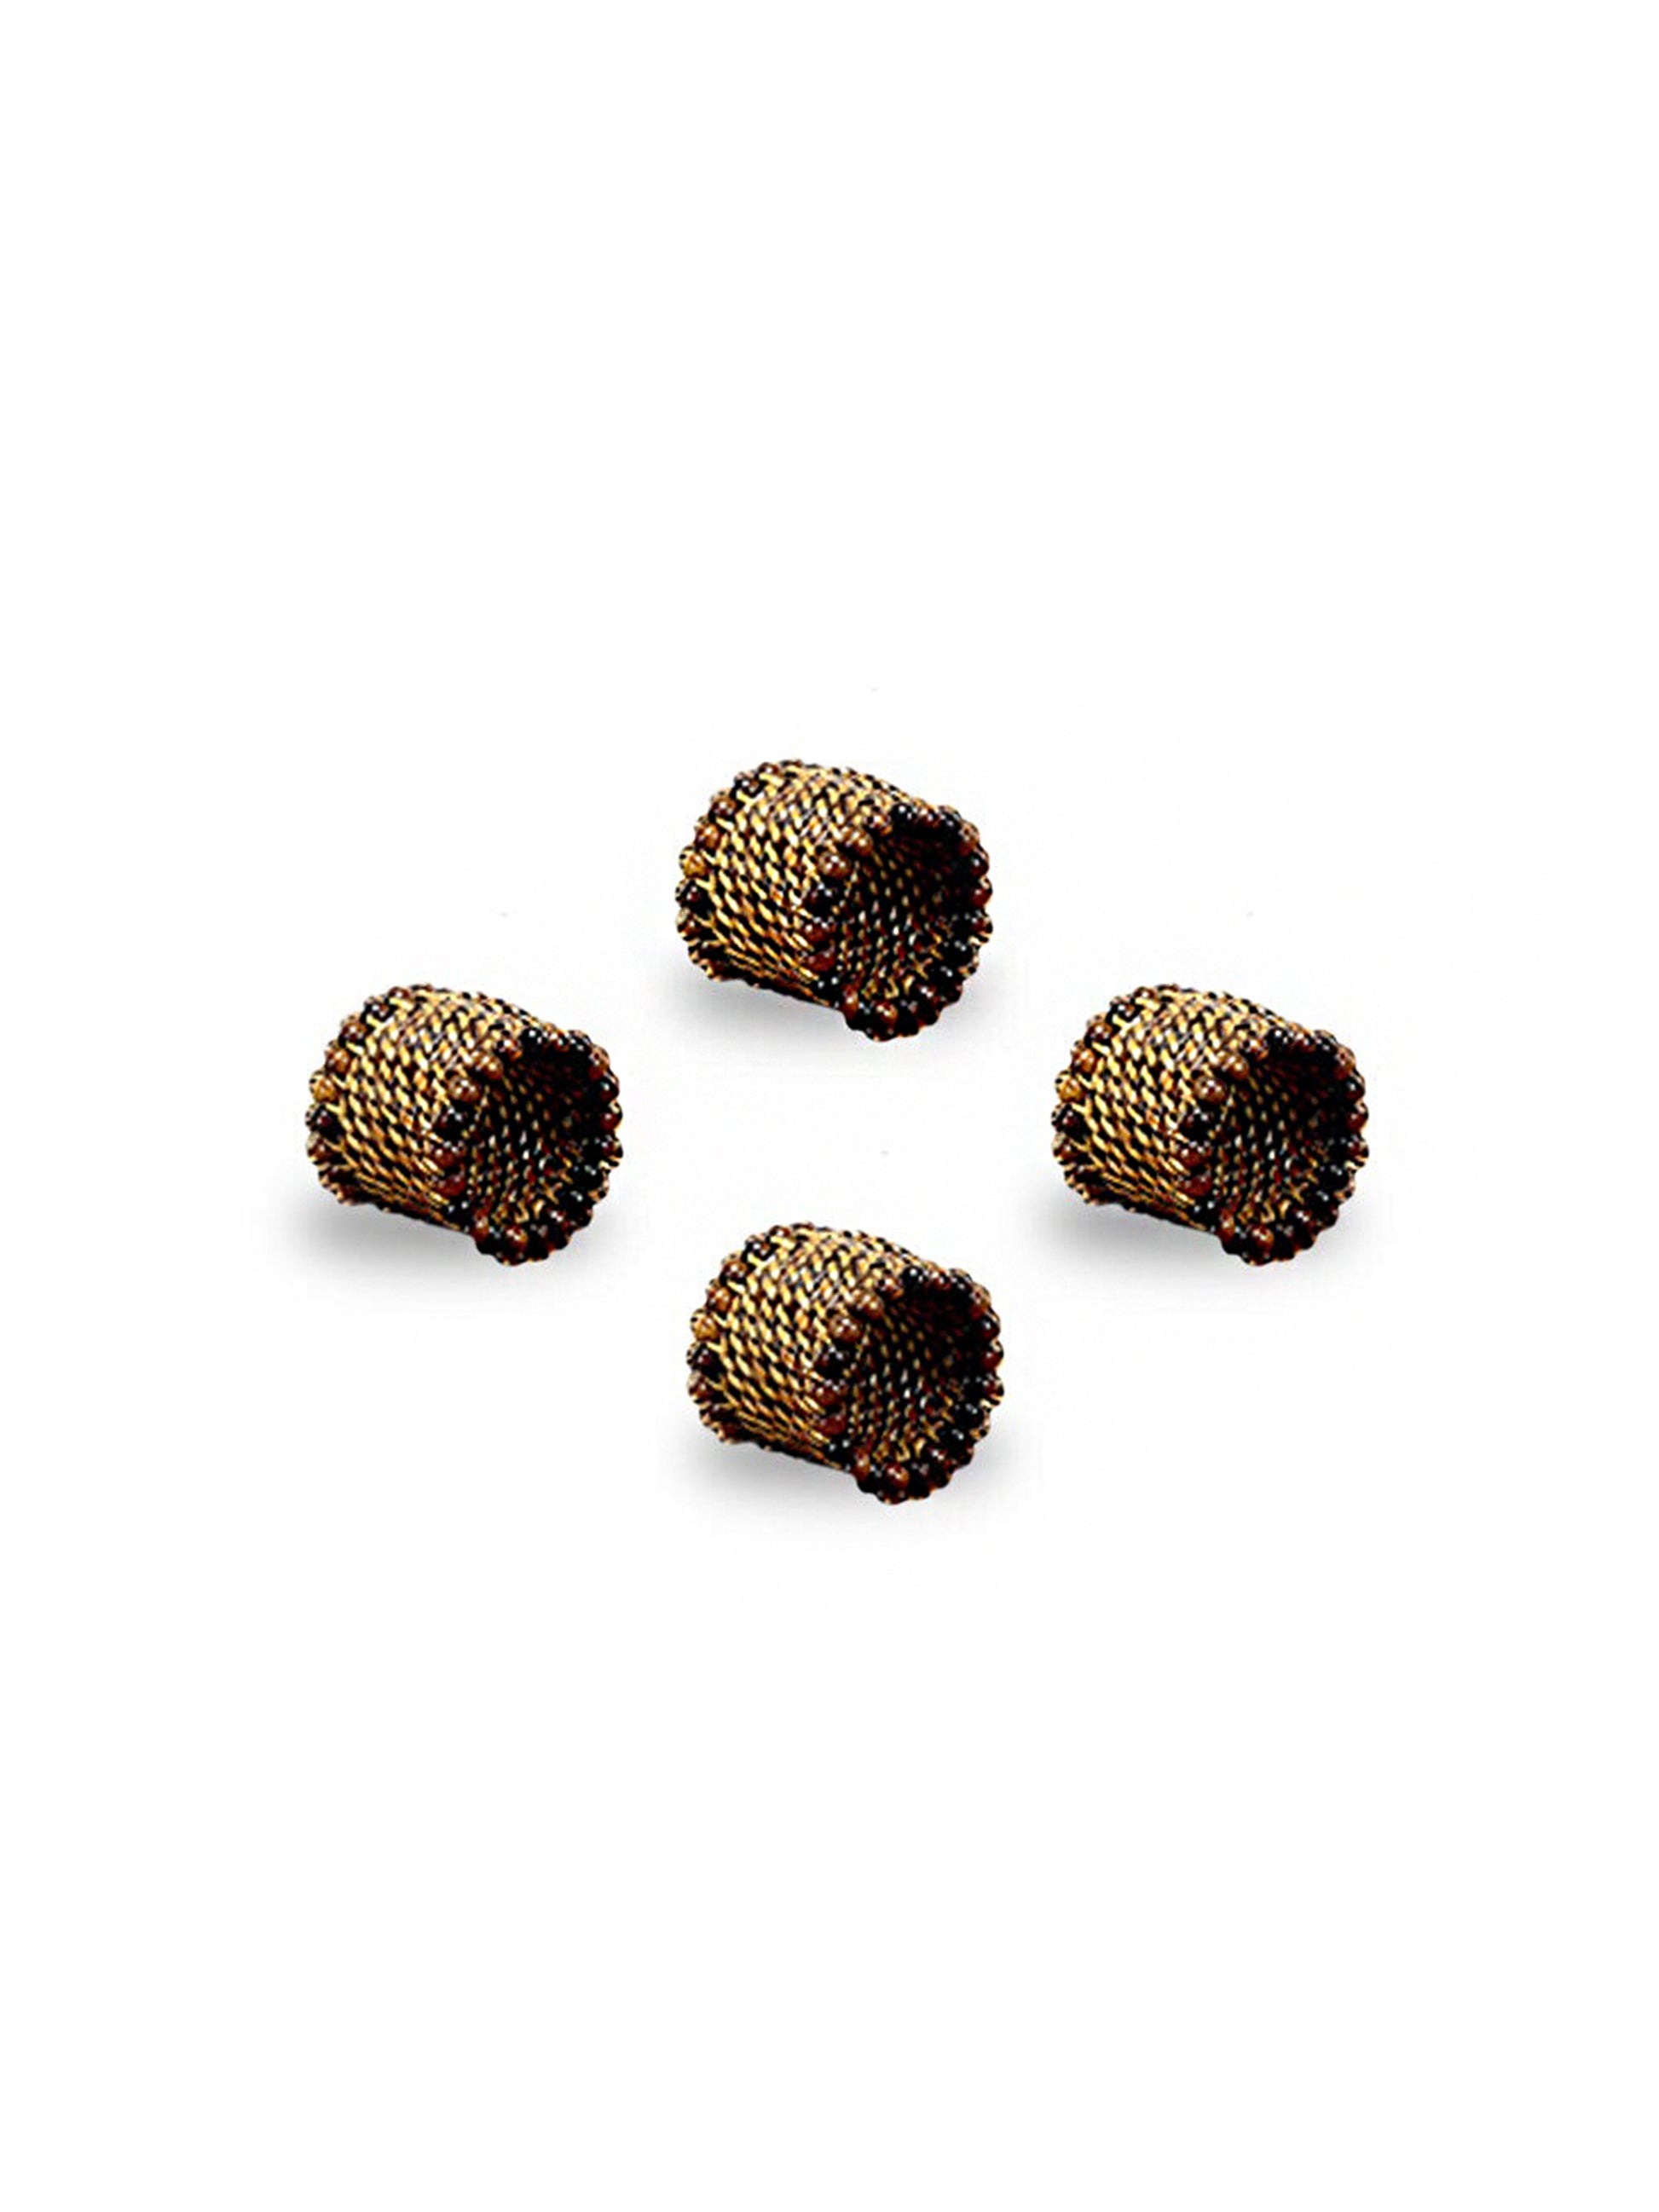 Calaisio Napkin Rings with Beads Weston Table